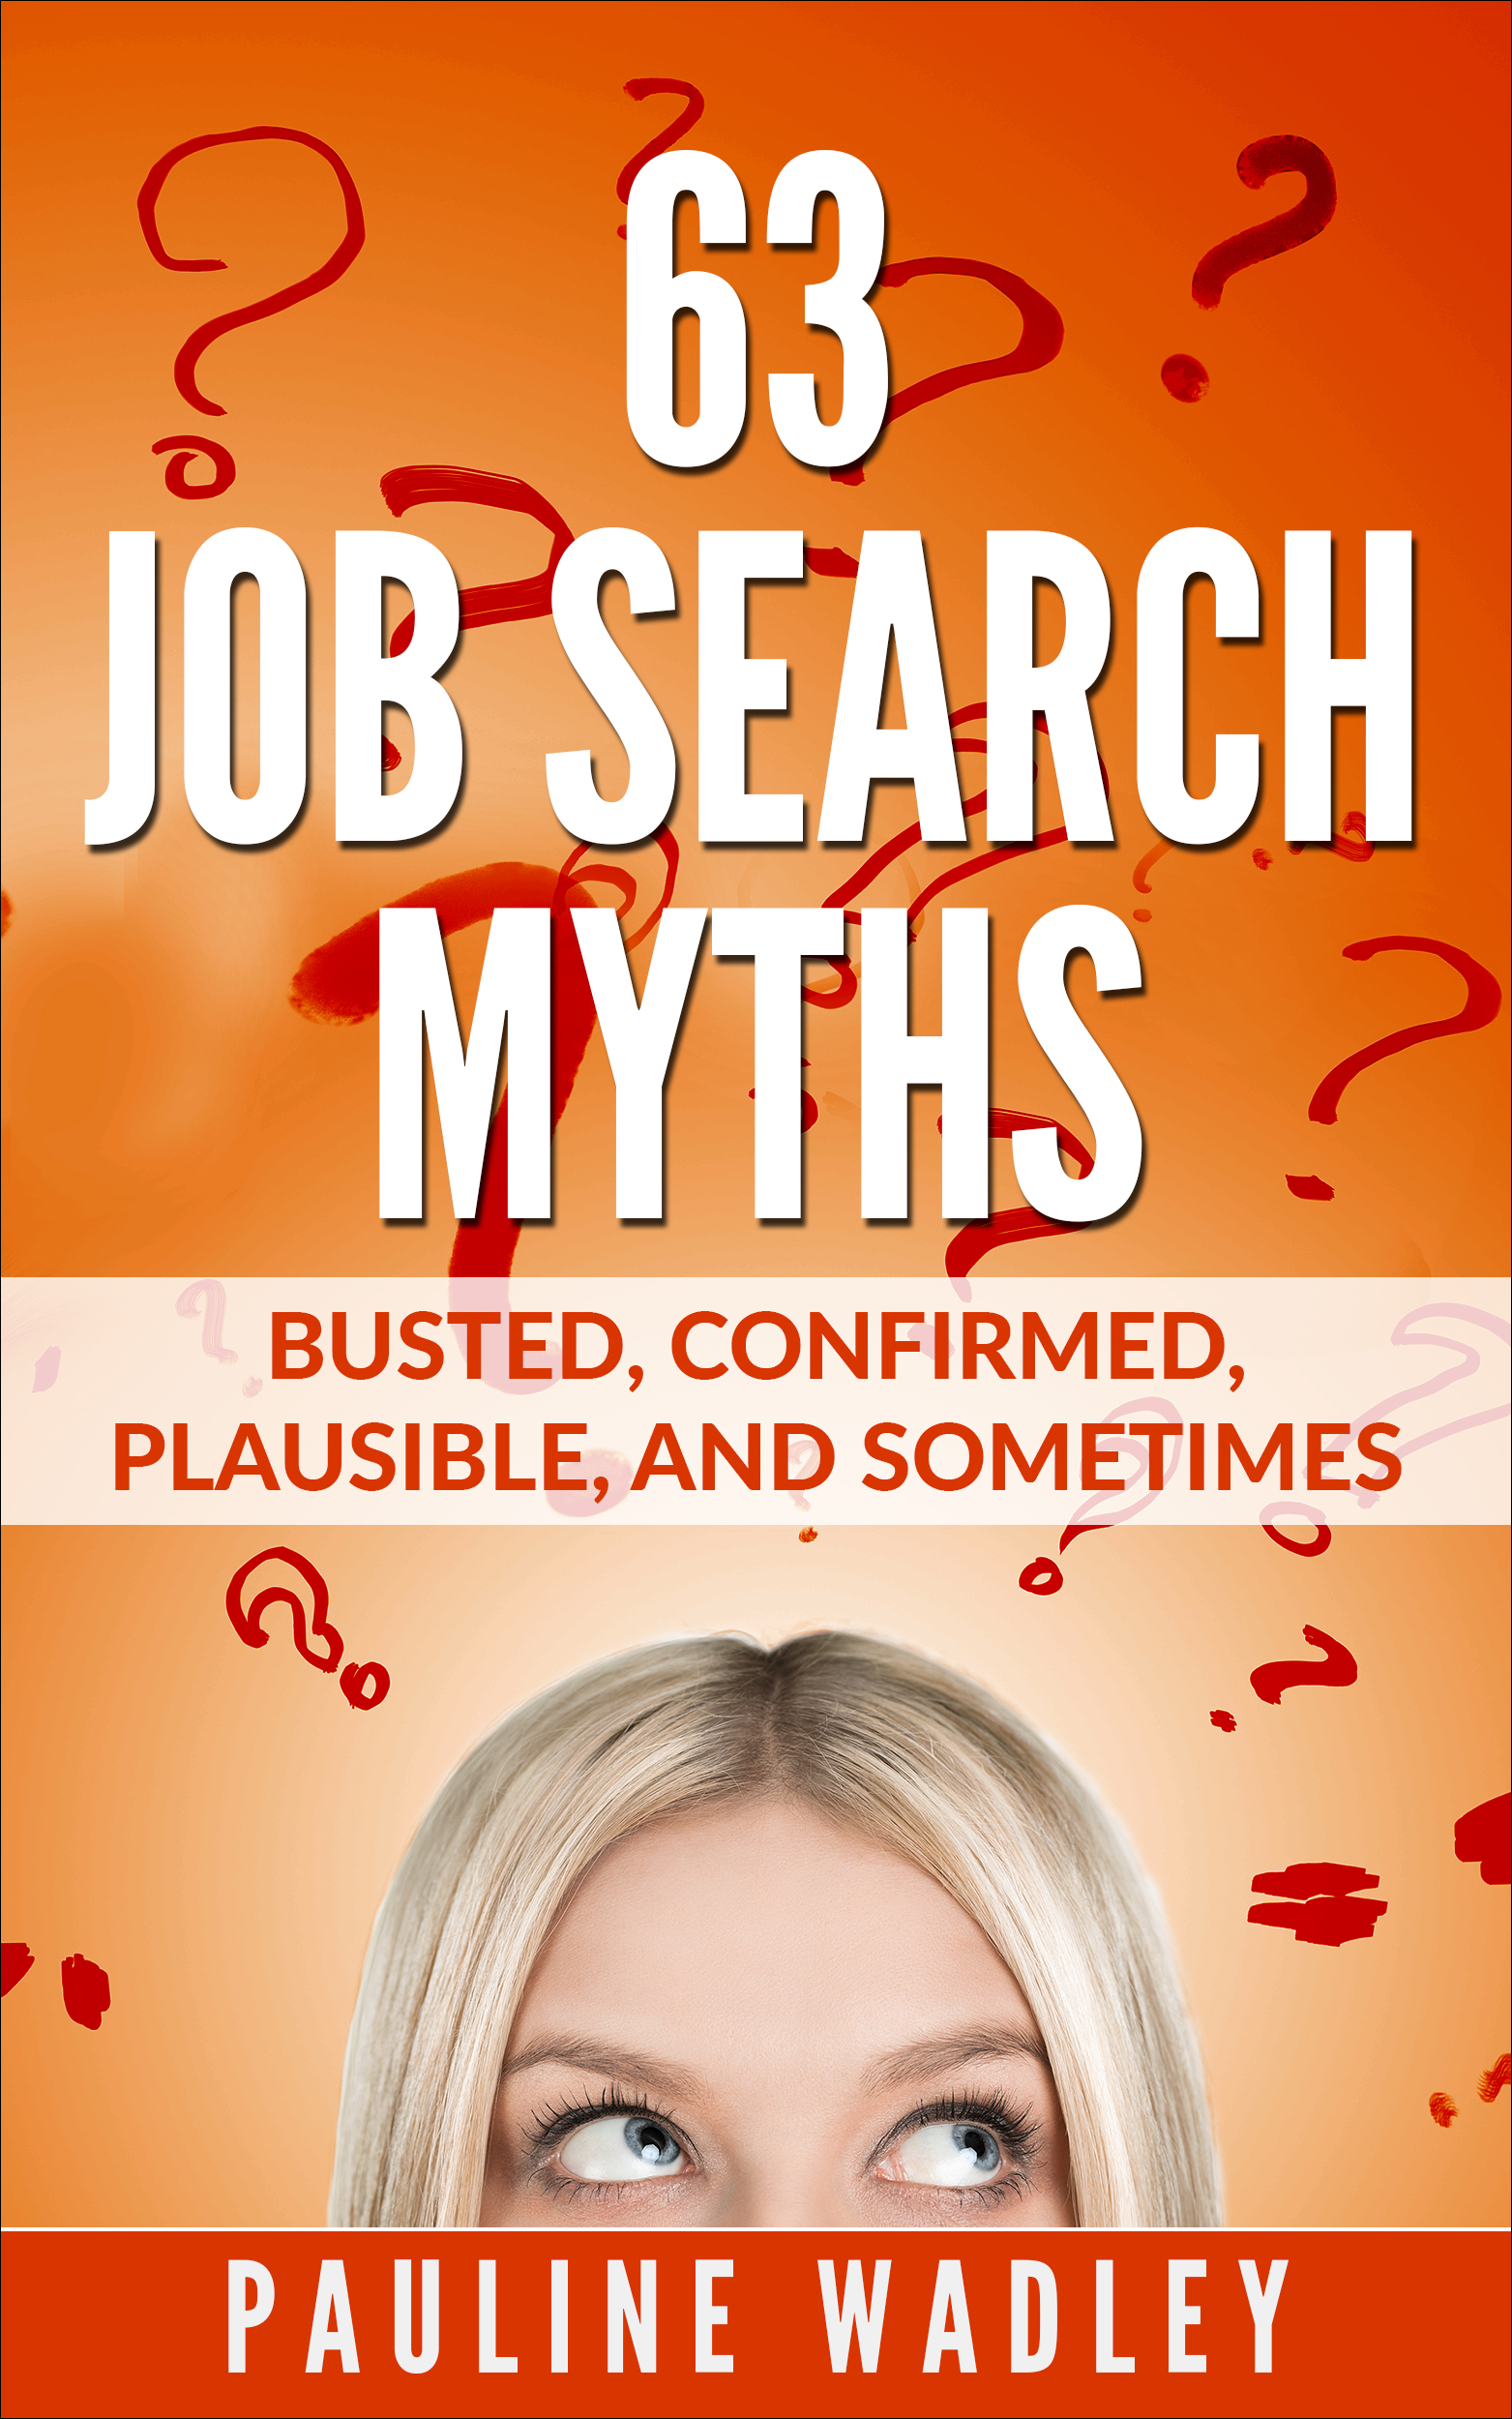 FREE: 63 Job Search Myths: Busted, Confirmed, Plausible, and Sometimes by Pauline Wadley